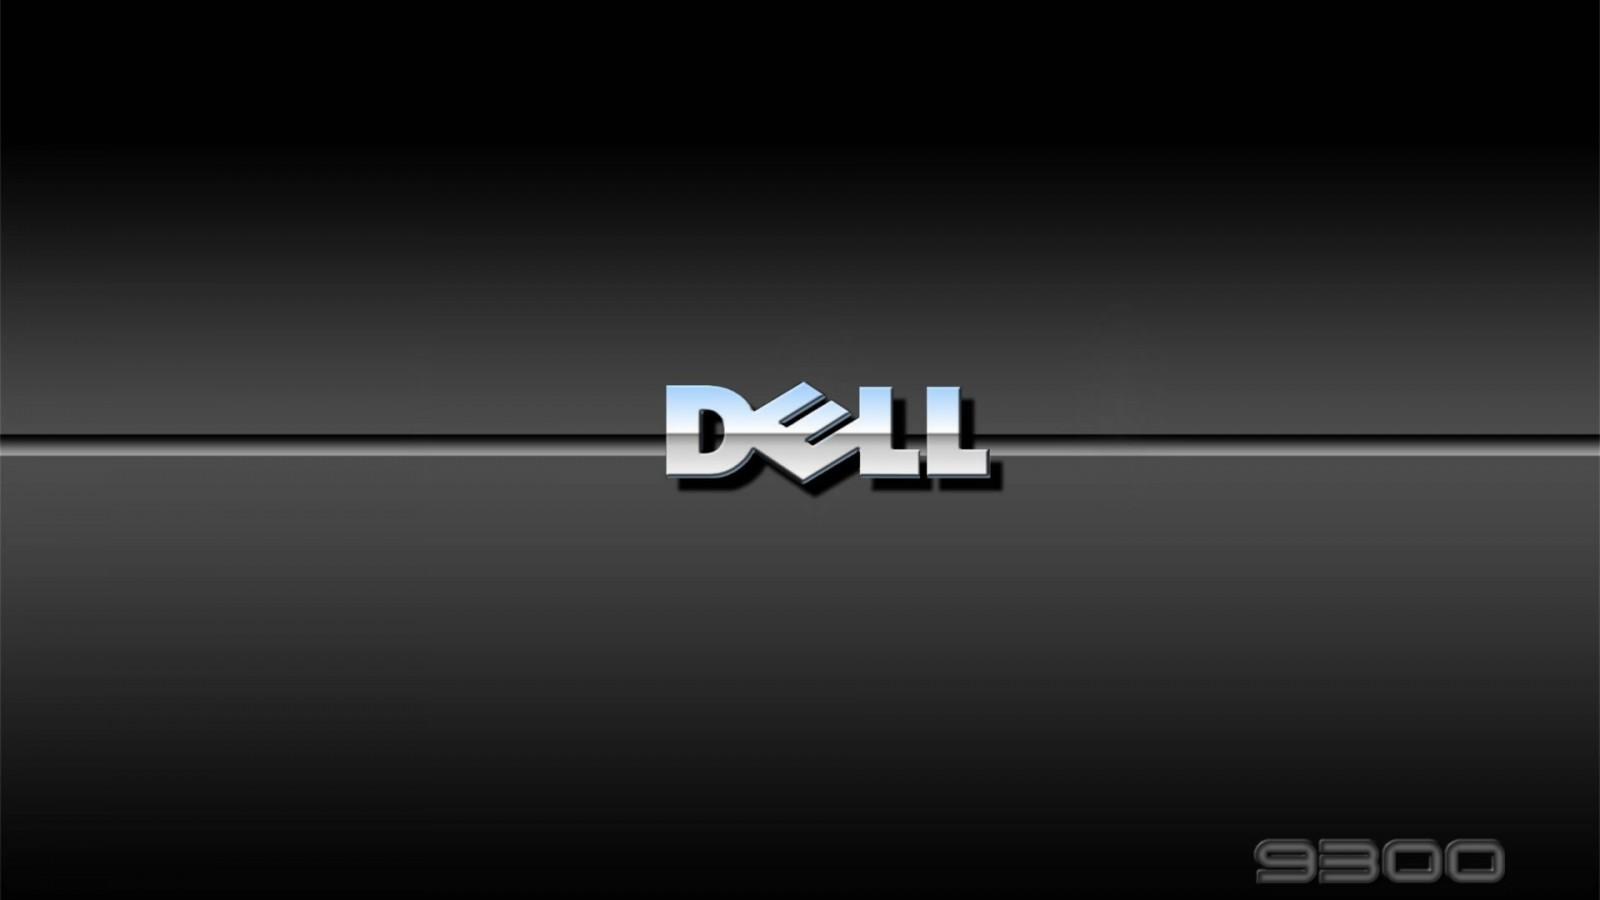 Red Dell Logo - HD Dell Backgrounds & Dell Wallpaper Images For Windows